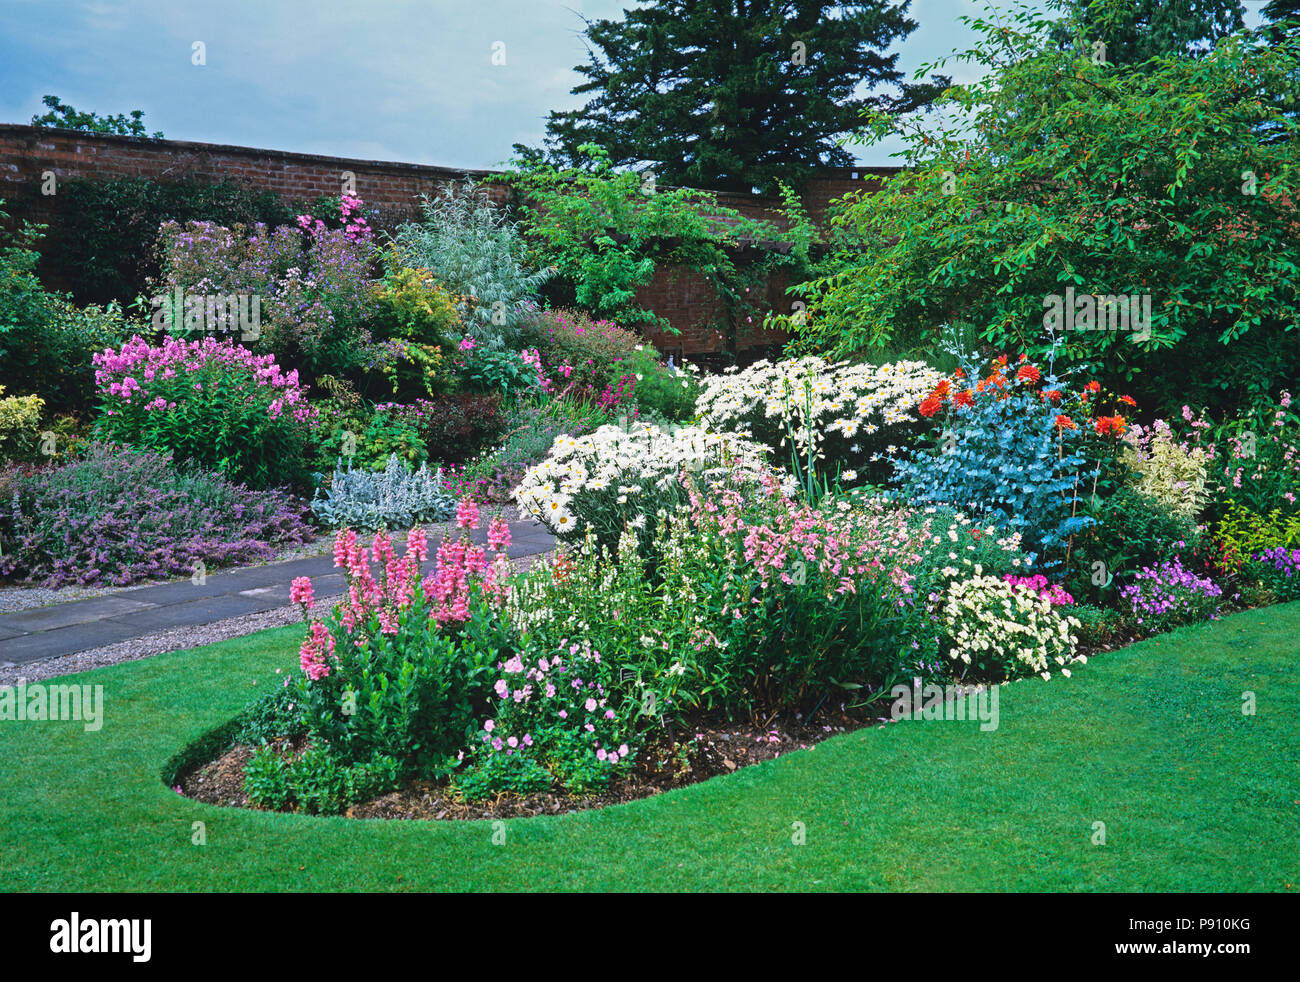 Pink and white flower bed at country garden Stock Photo